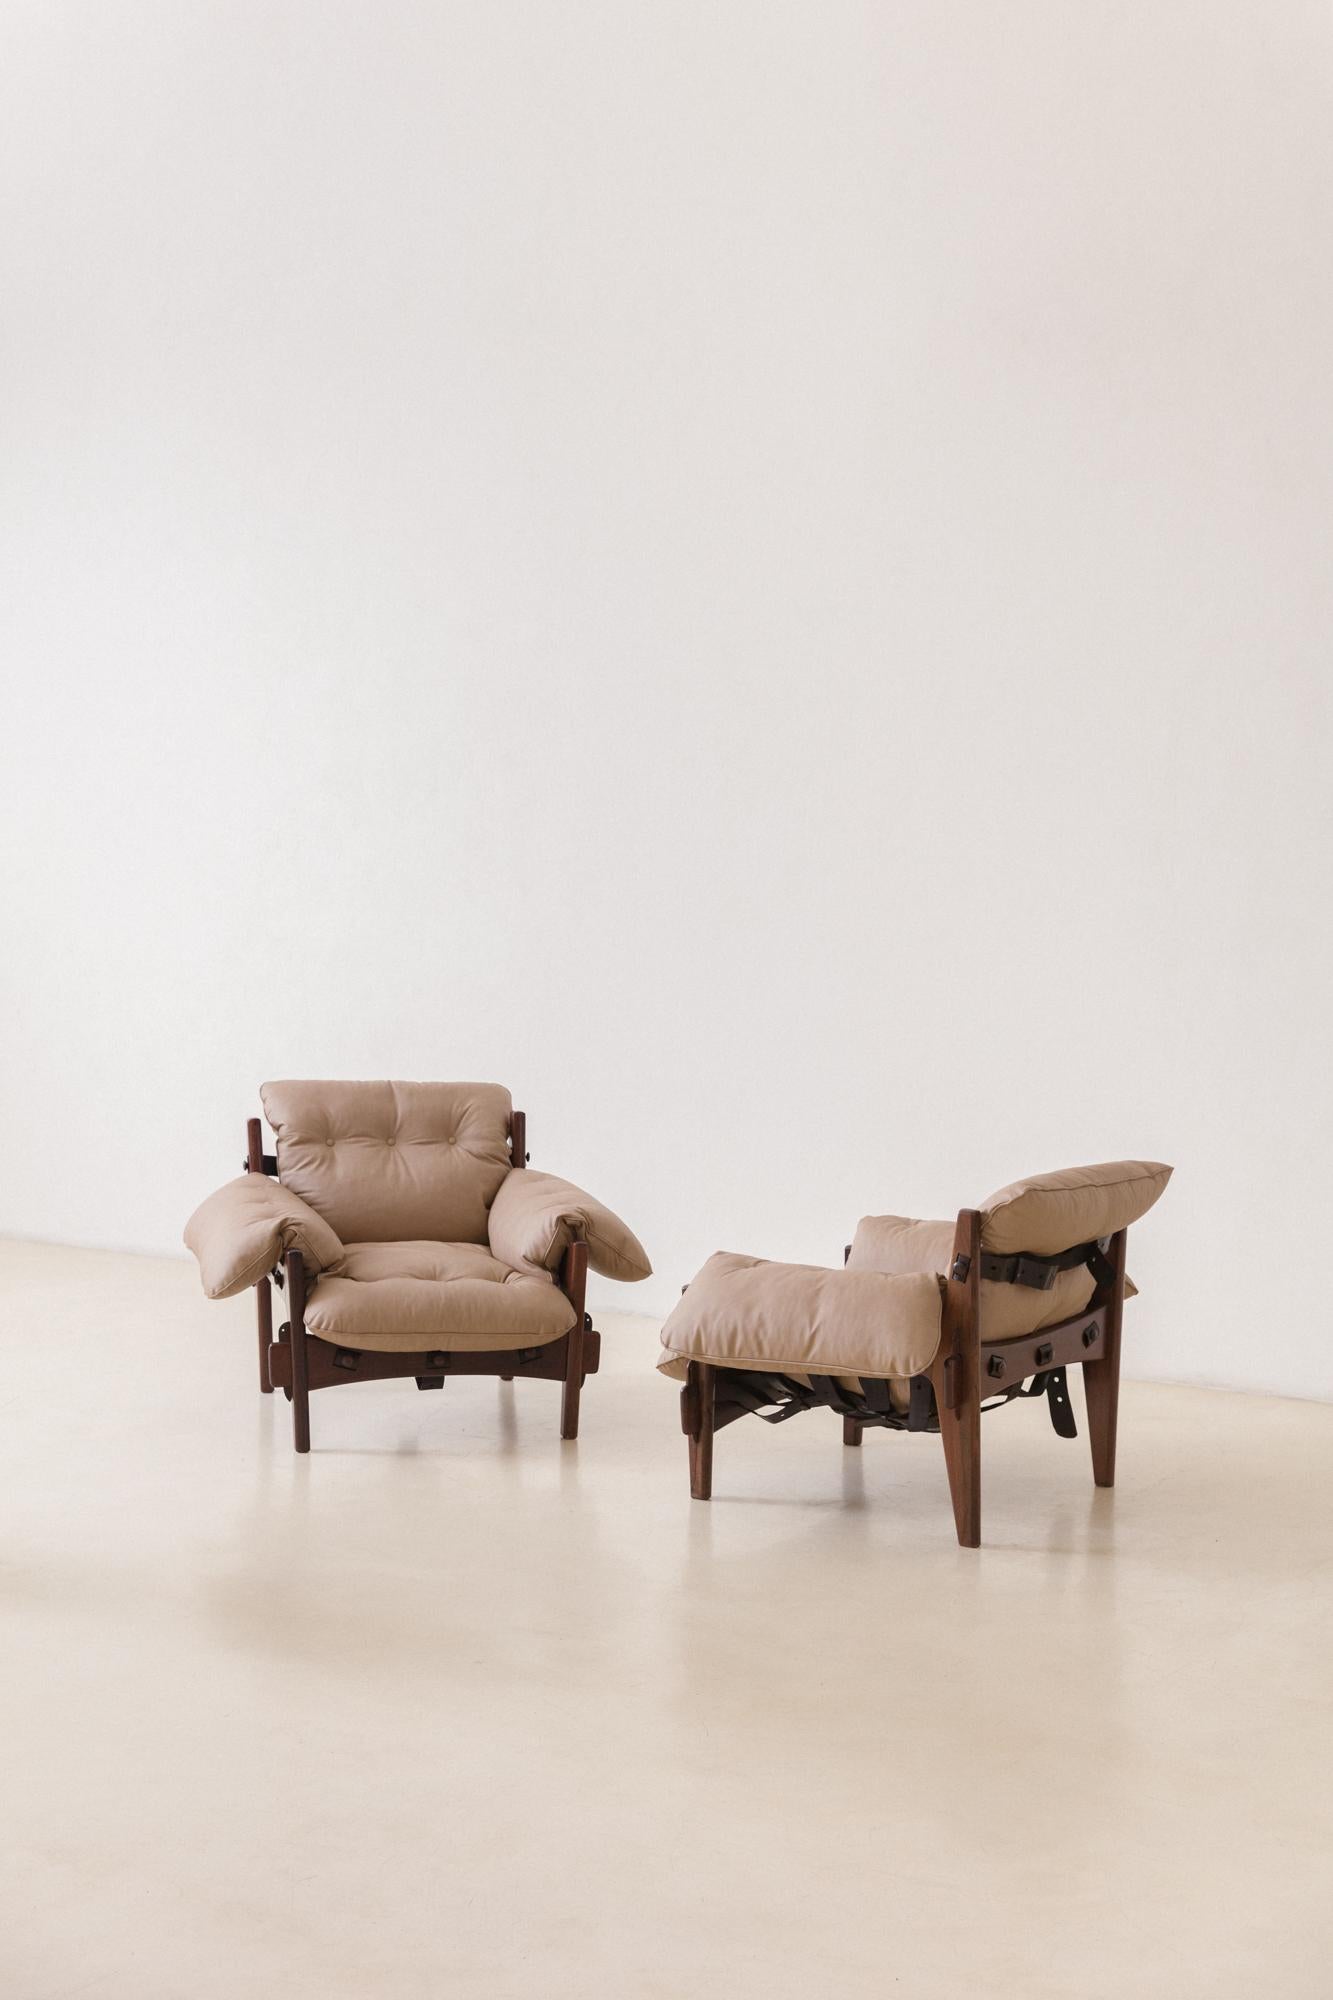 Brazilian Vintage Pair of Moleca Rosewood Armchairs by Sergio Rodrigues, 1962, Brazil For Sale